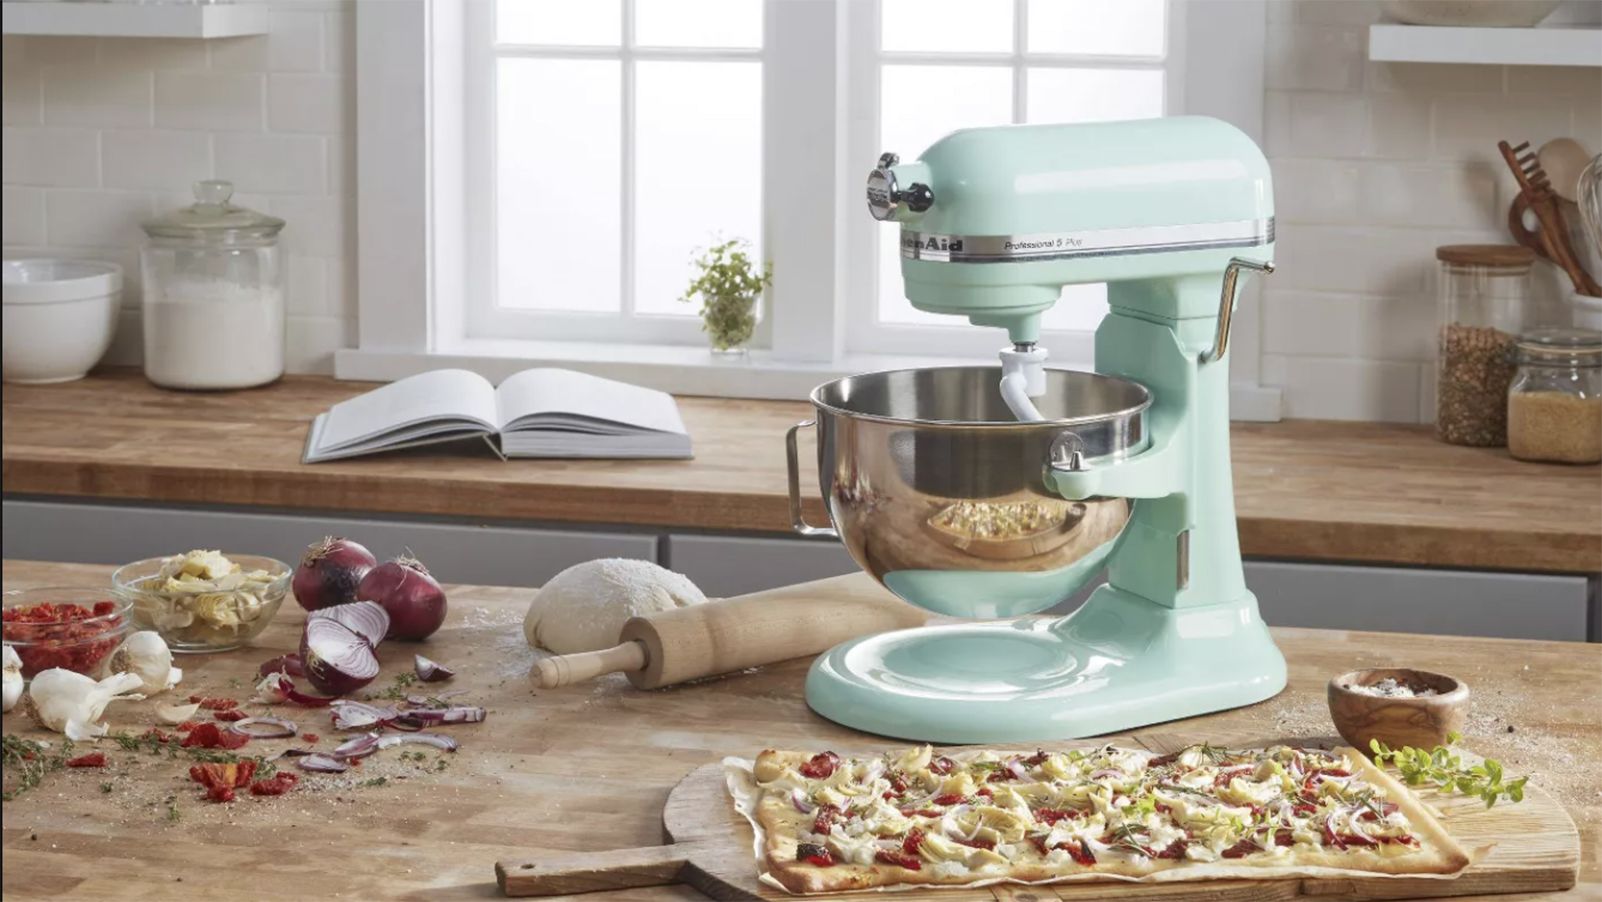 A $200 KitchenAid stand mixer and Cuisinarts on sale at Best Buy - CNET